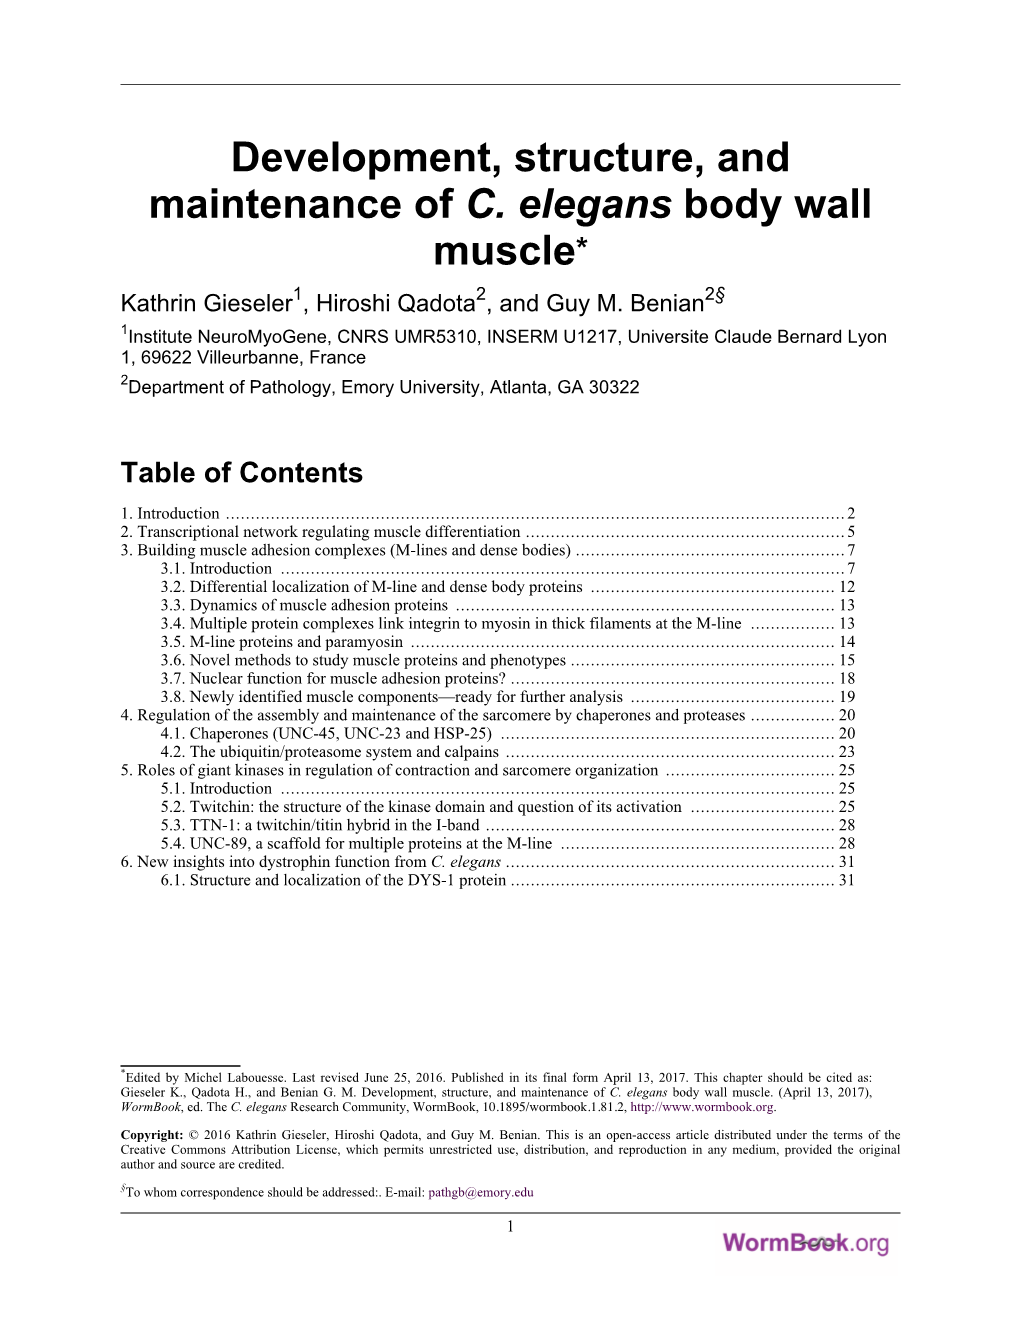 Development, Structure, and Maintenance of C. Elegans Body Wall Muscle* Kathrin Gieseler1, Hiroshi Qadota2, and Guy M